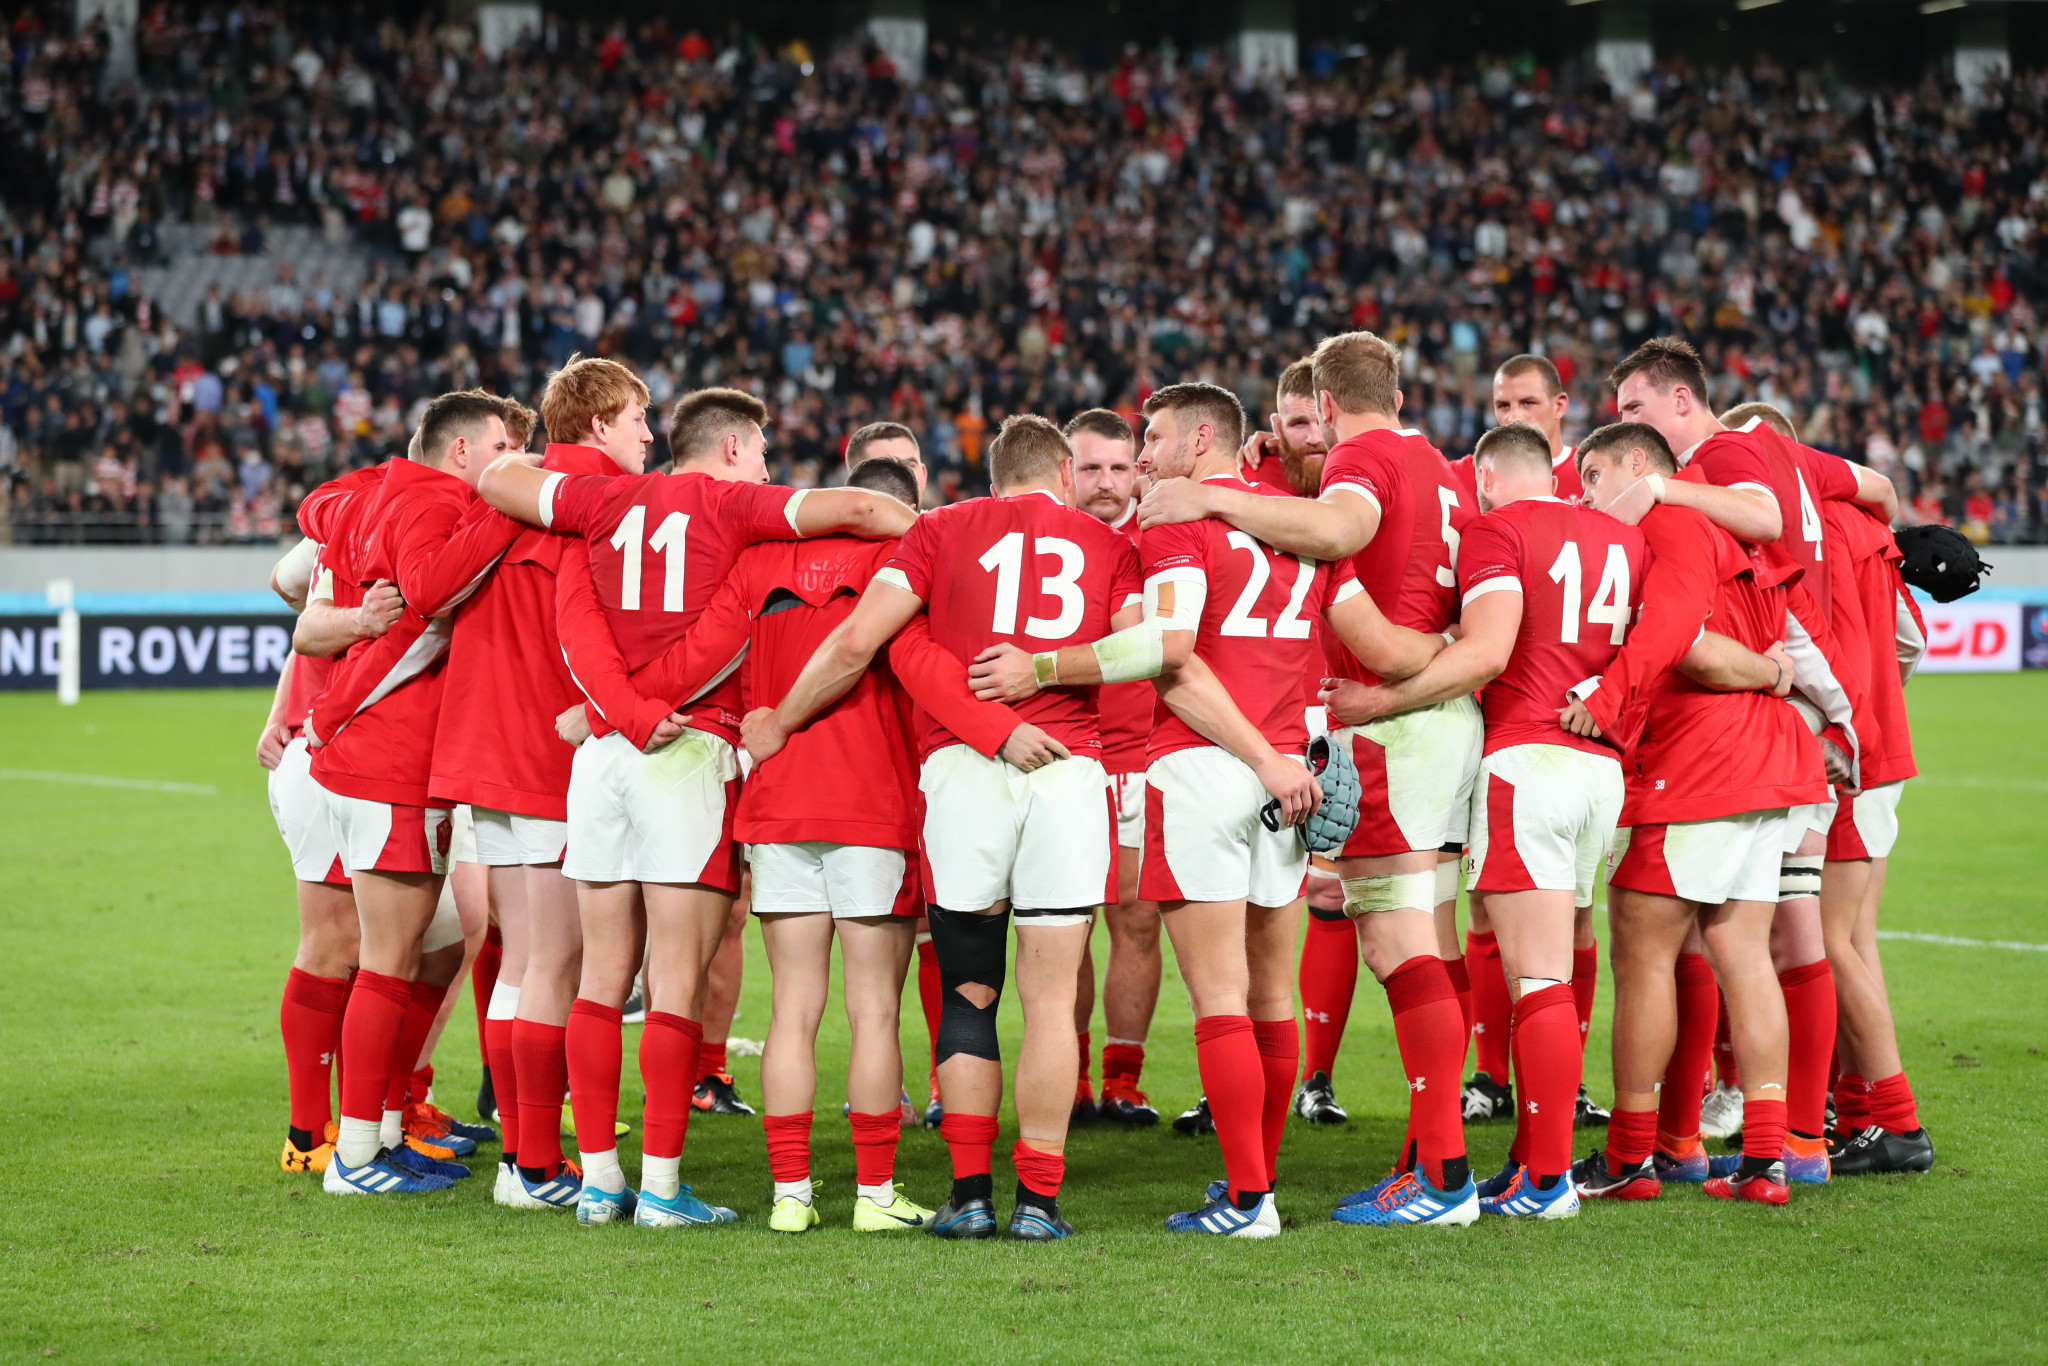 The Welsh side looked dejected at the final whistle ©Getty Images